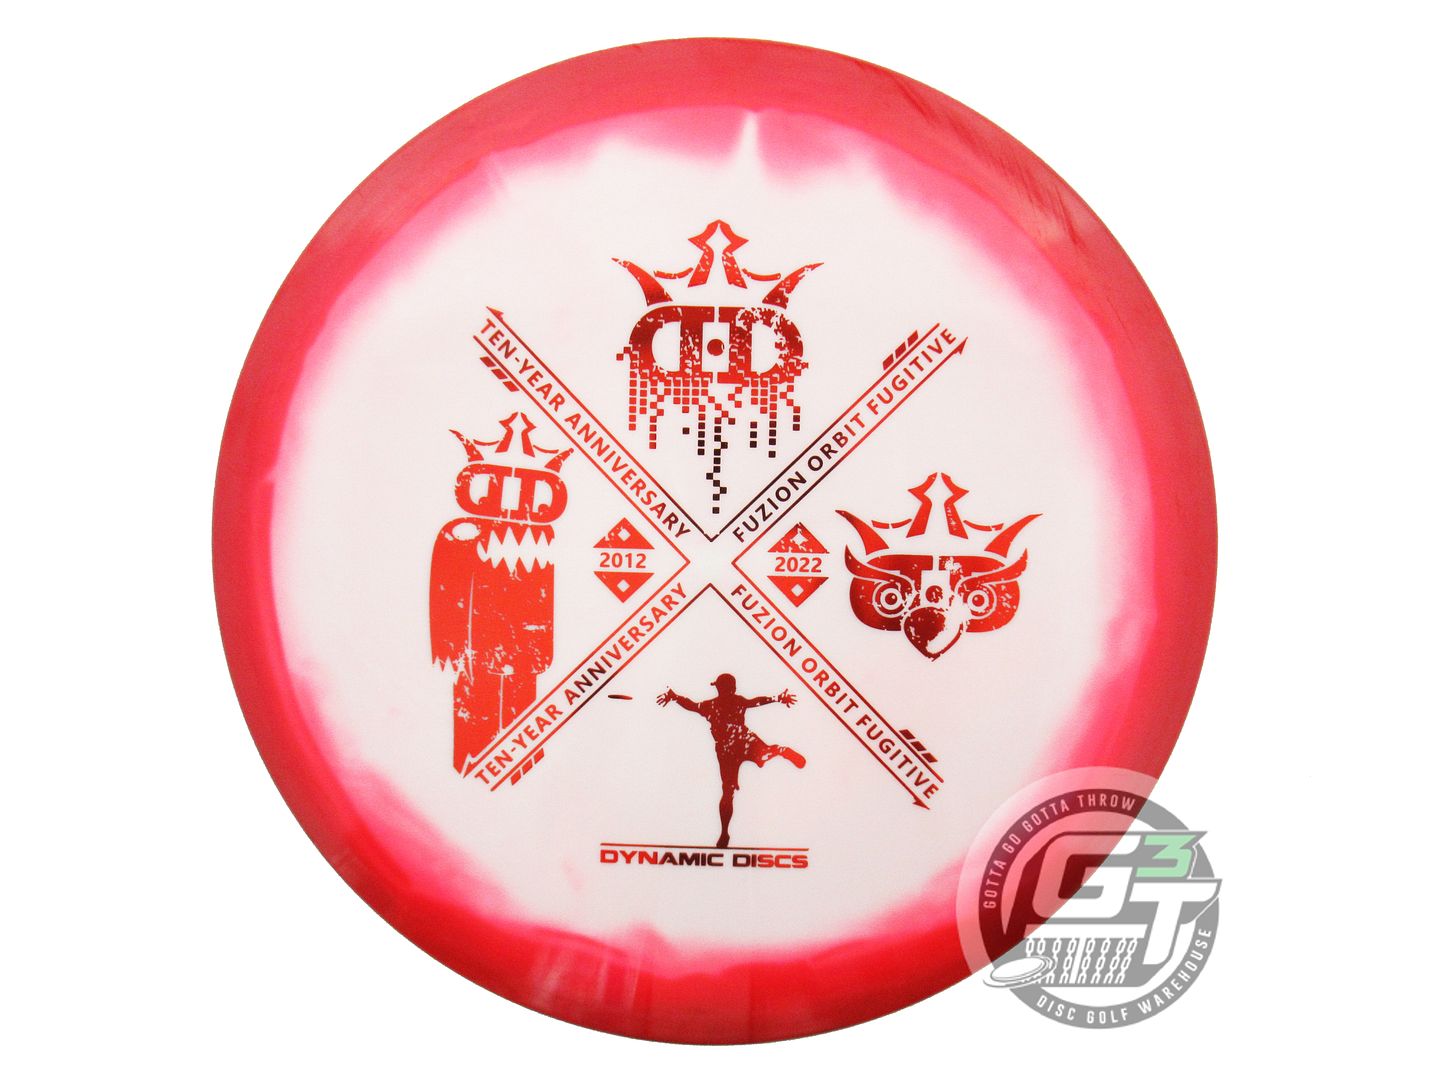 Dynamic Discs Limited Edition 10-Year Anniversary Fuzion Orbit Fugitive Midrange Golf Disc (Individually Listed)